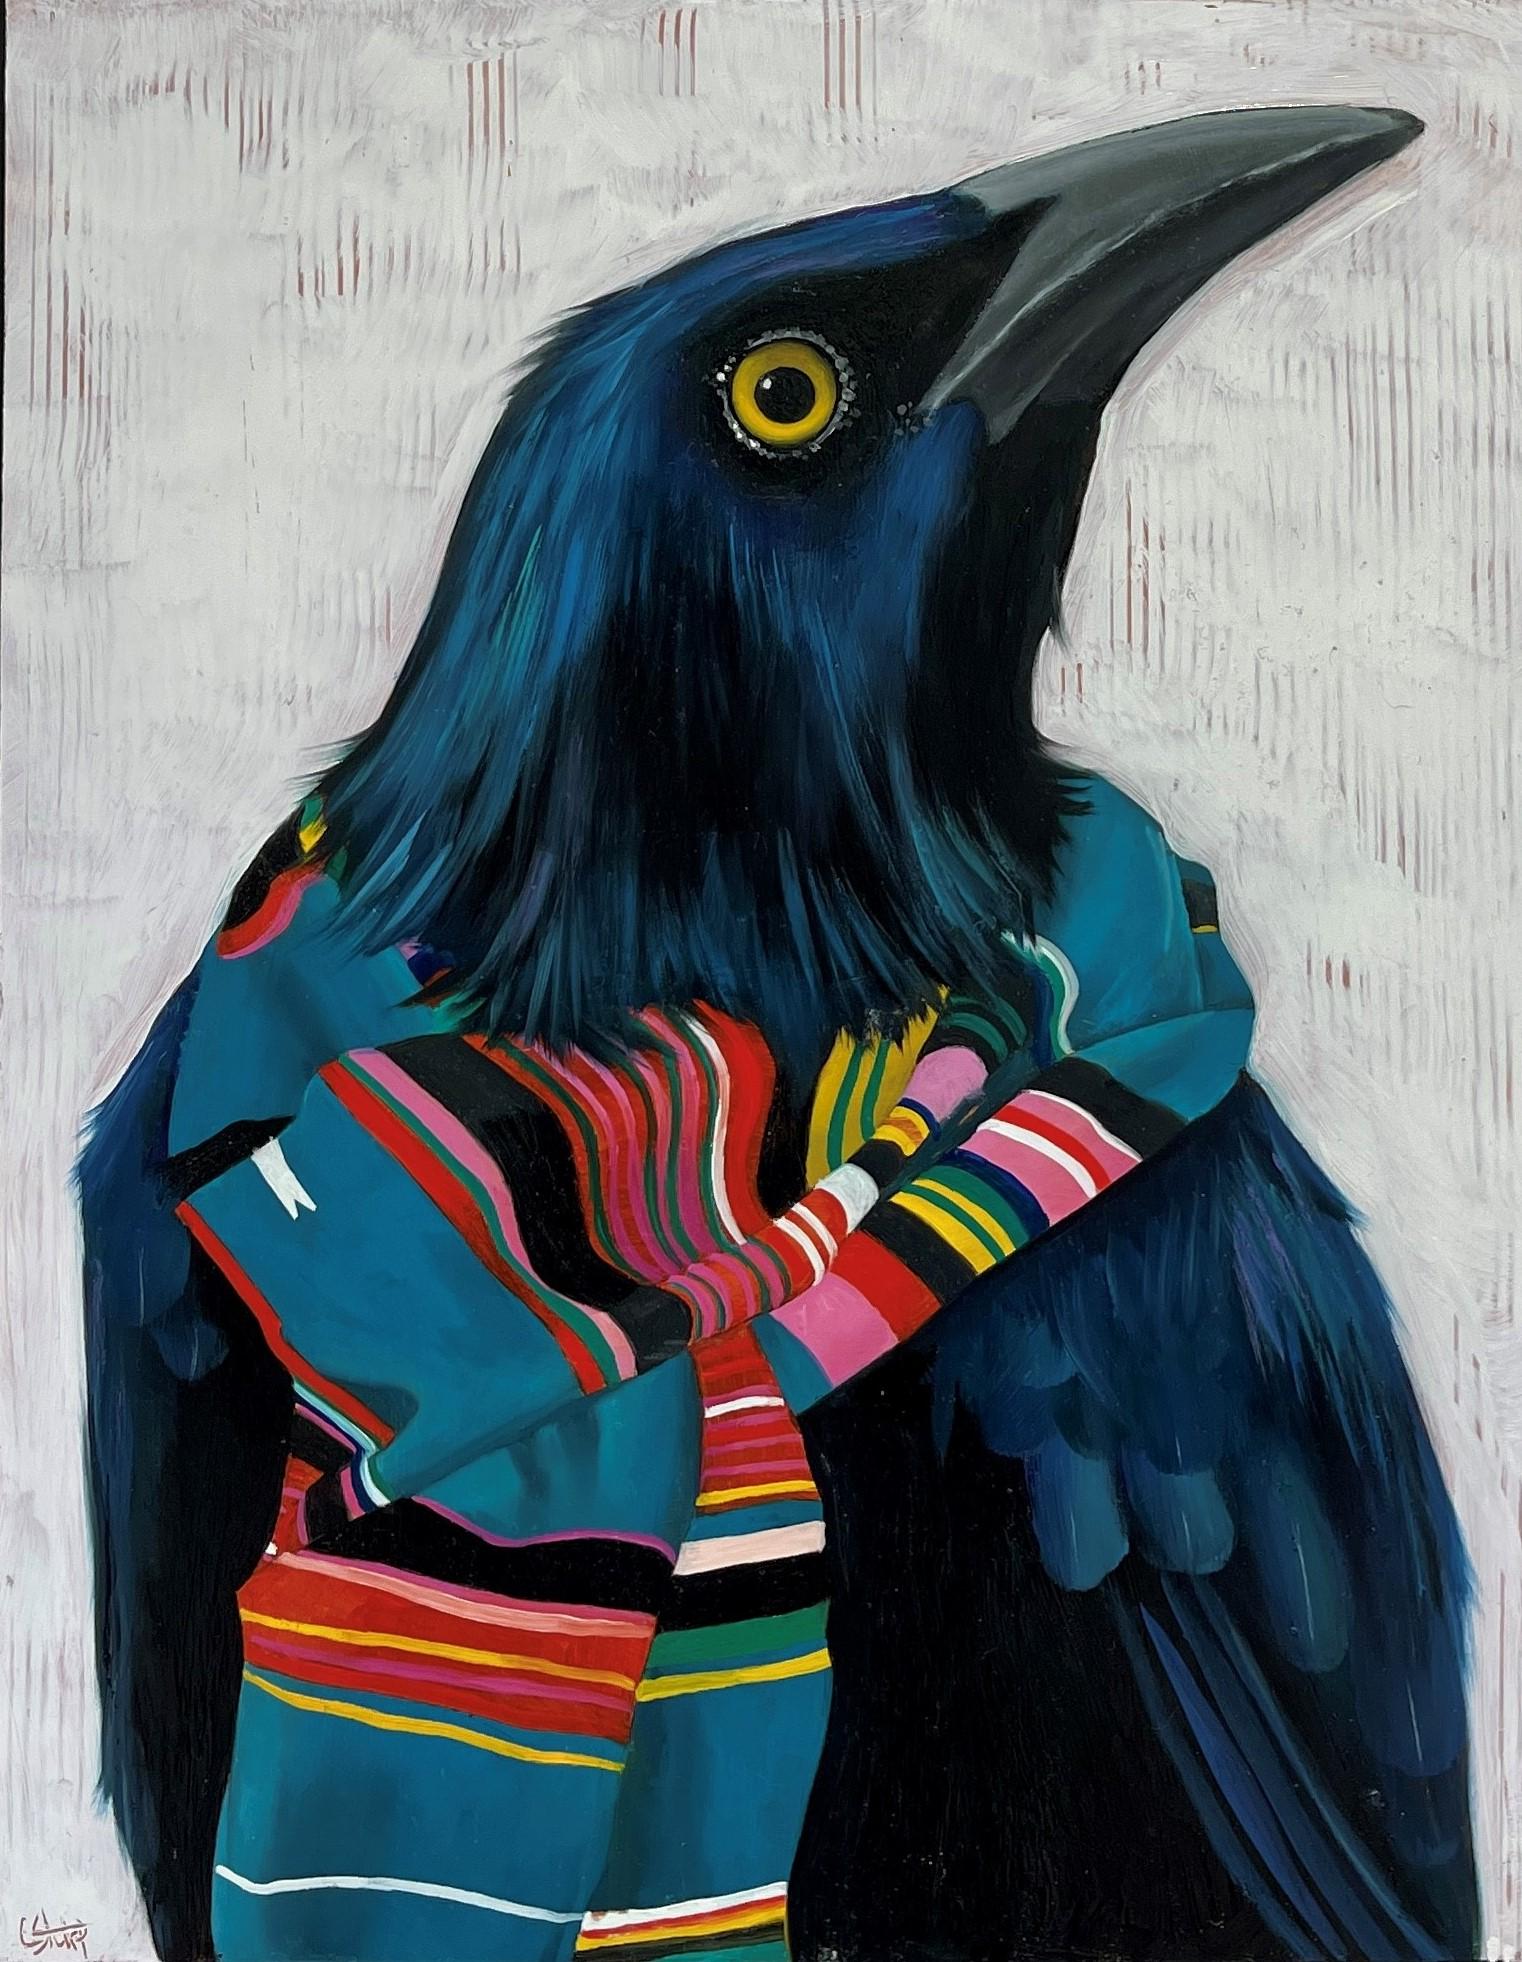 "Bundle Up" Grackle Bird with Colorful Scarf Oil Painting by Christy Stallop